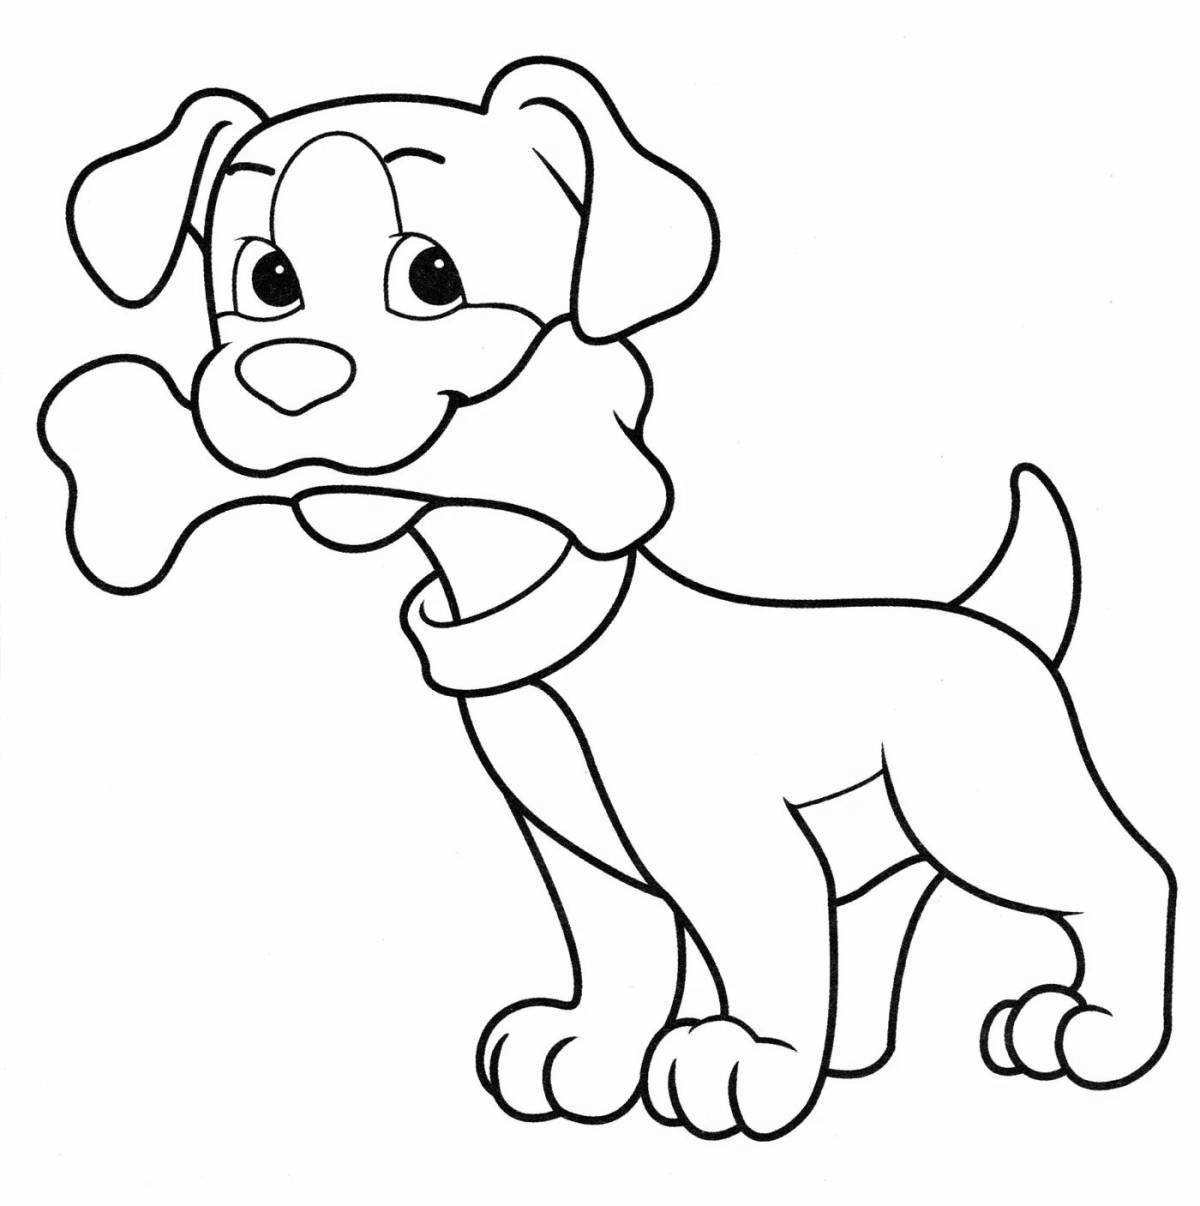 Snuggly coloring page puppy для малышей